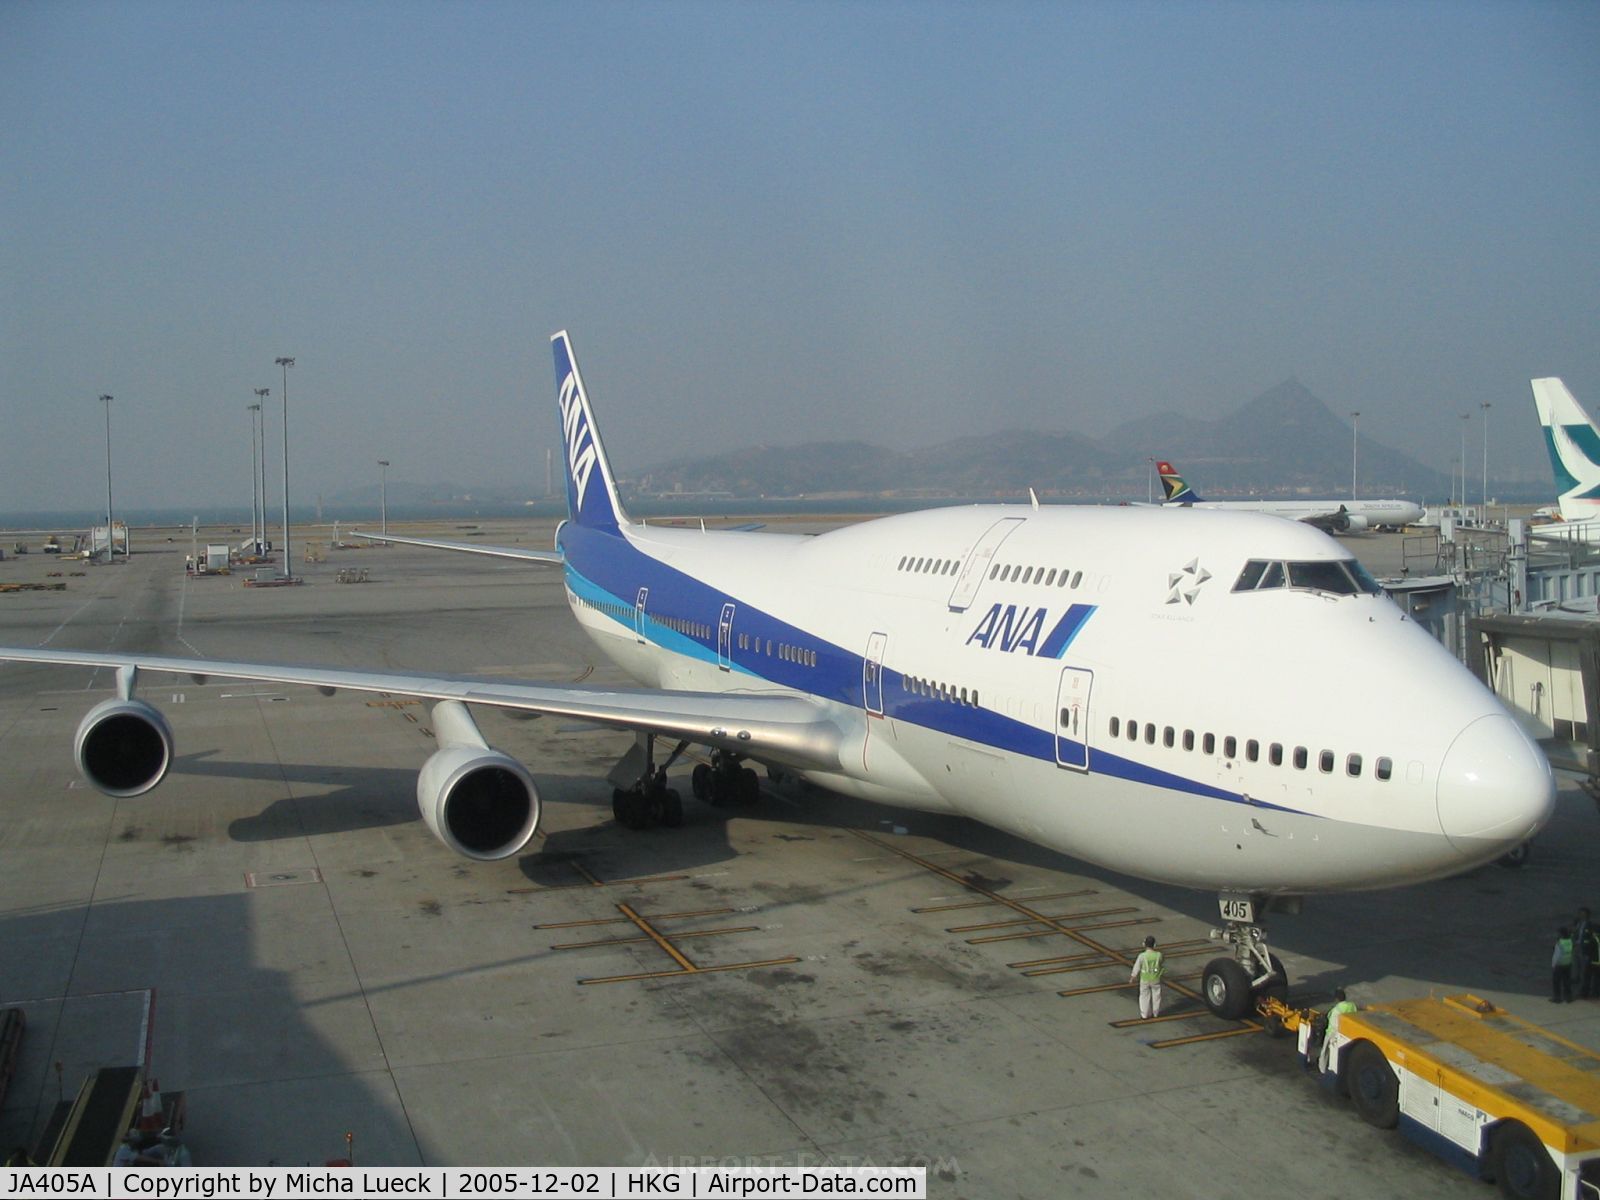 JA405A, 2000 Boeing 747-481 C/N 30322, ANA's B747-400 seconds before push-back in Hong Kong